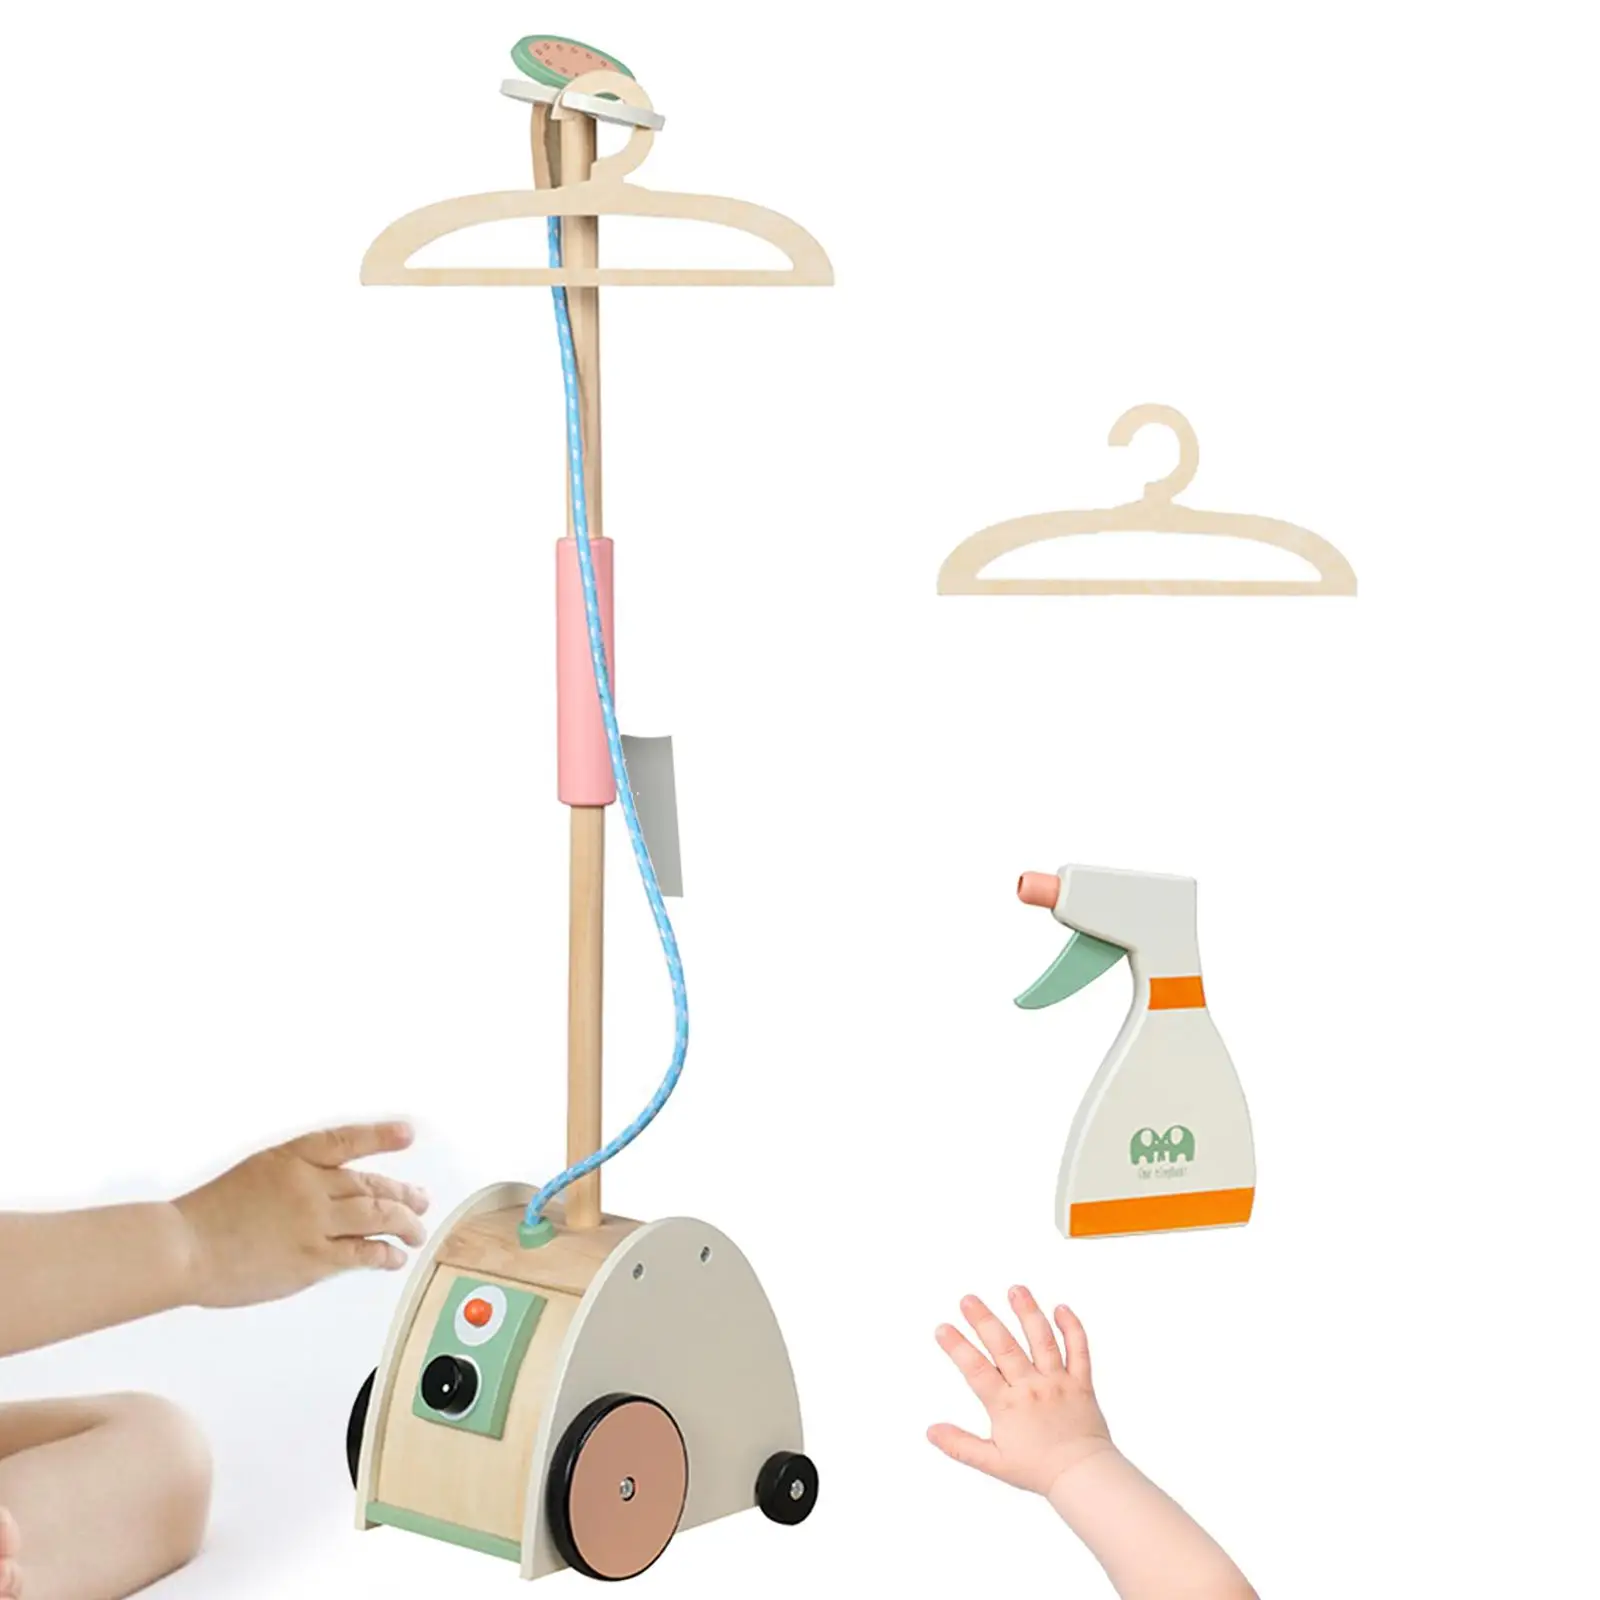 Mini Housekeeping Playset Educational Toy Doll House Role Play Toddler Toy Garment Steamer for Boys Girls Holiday Present